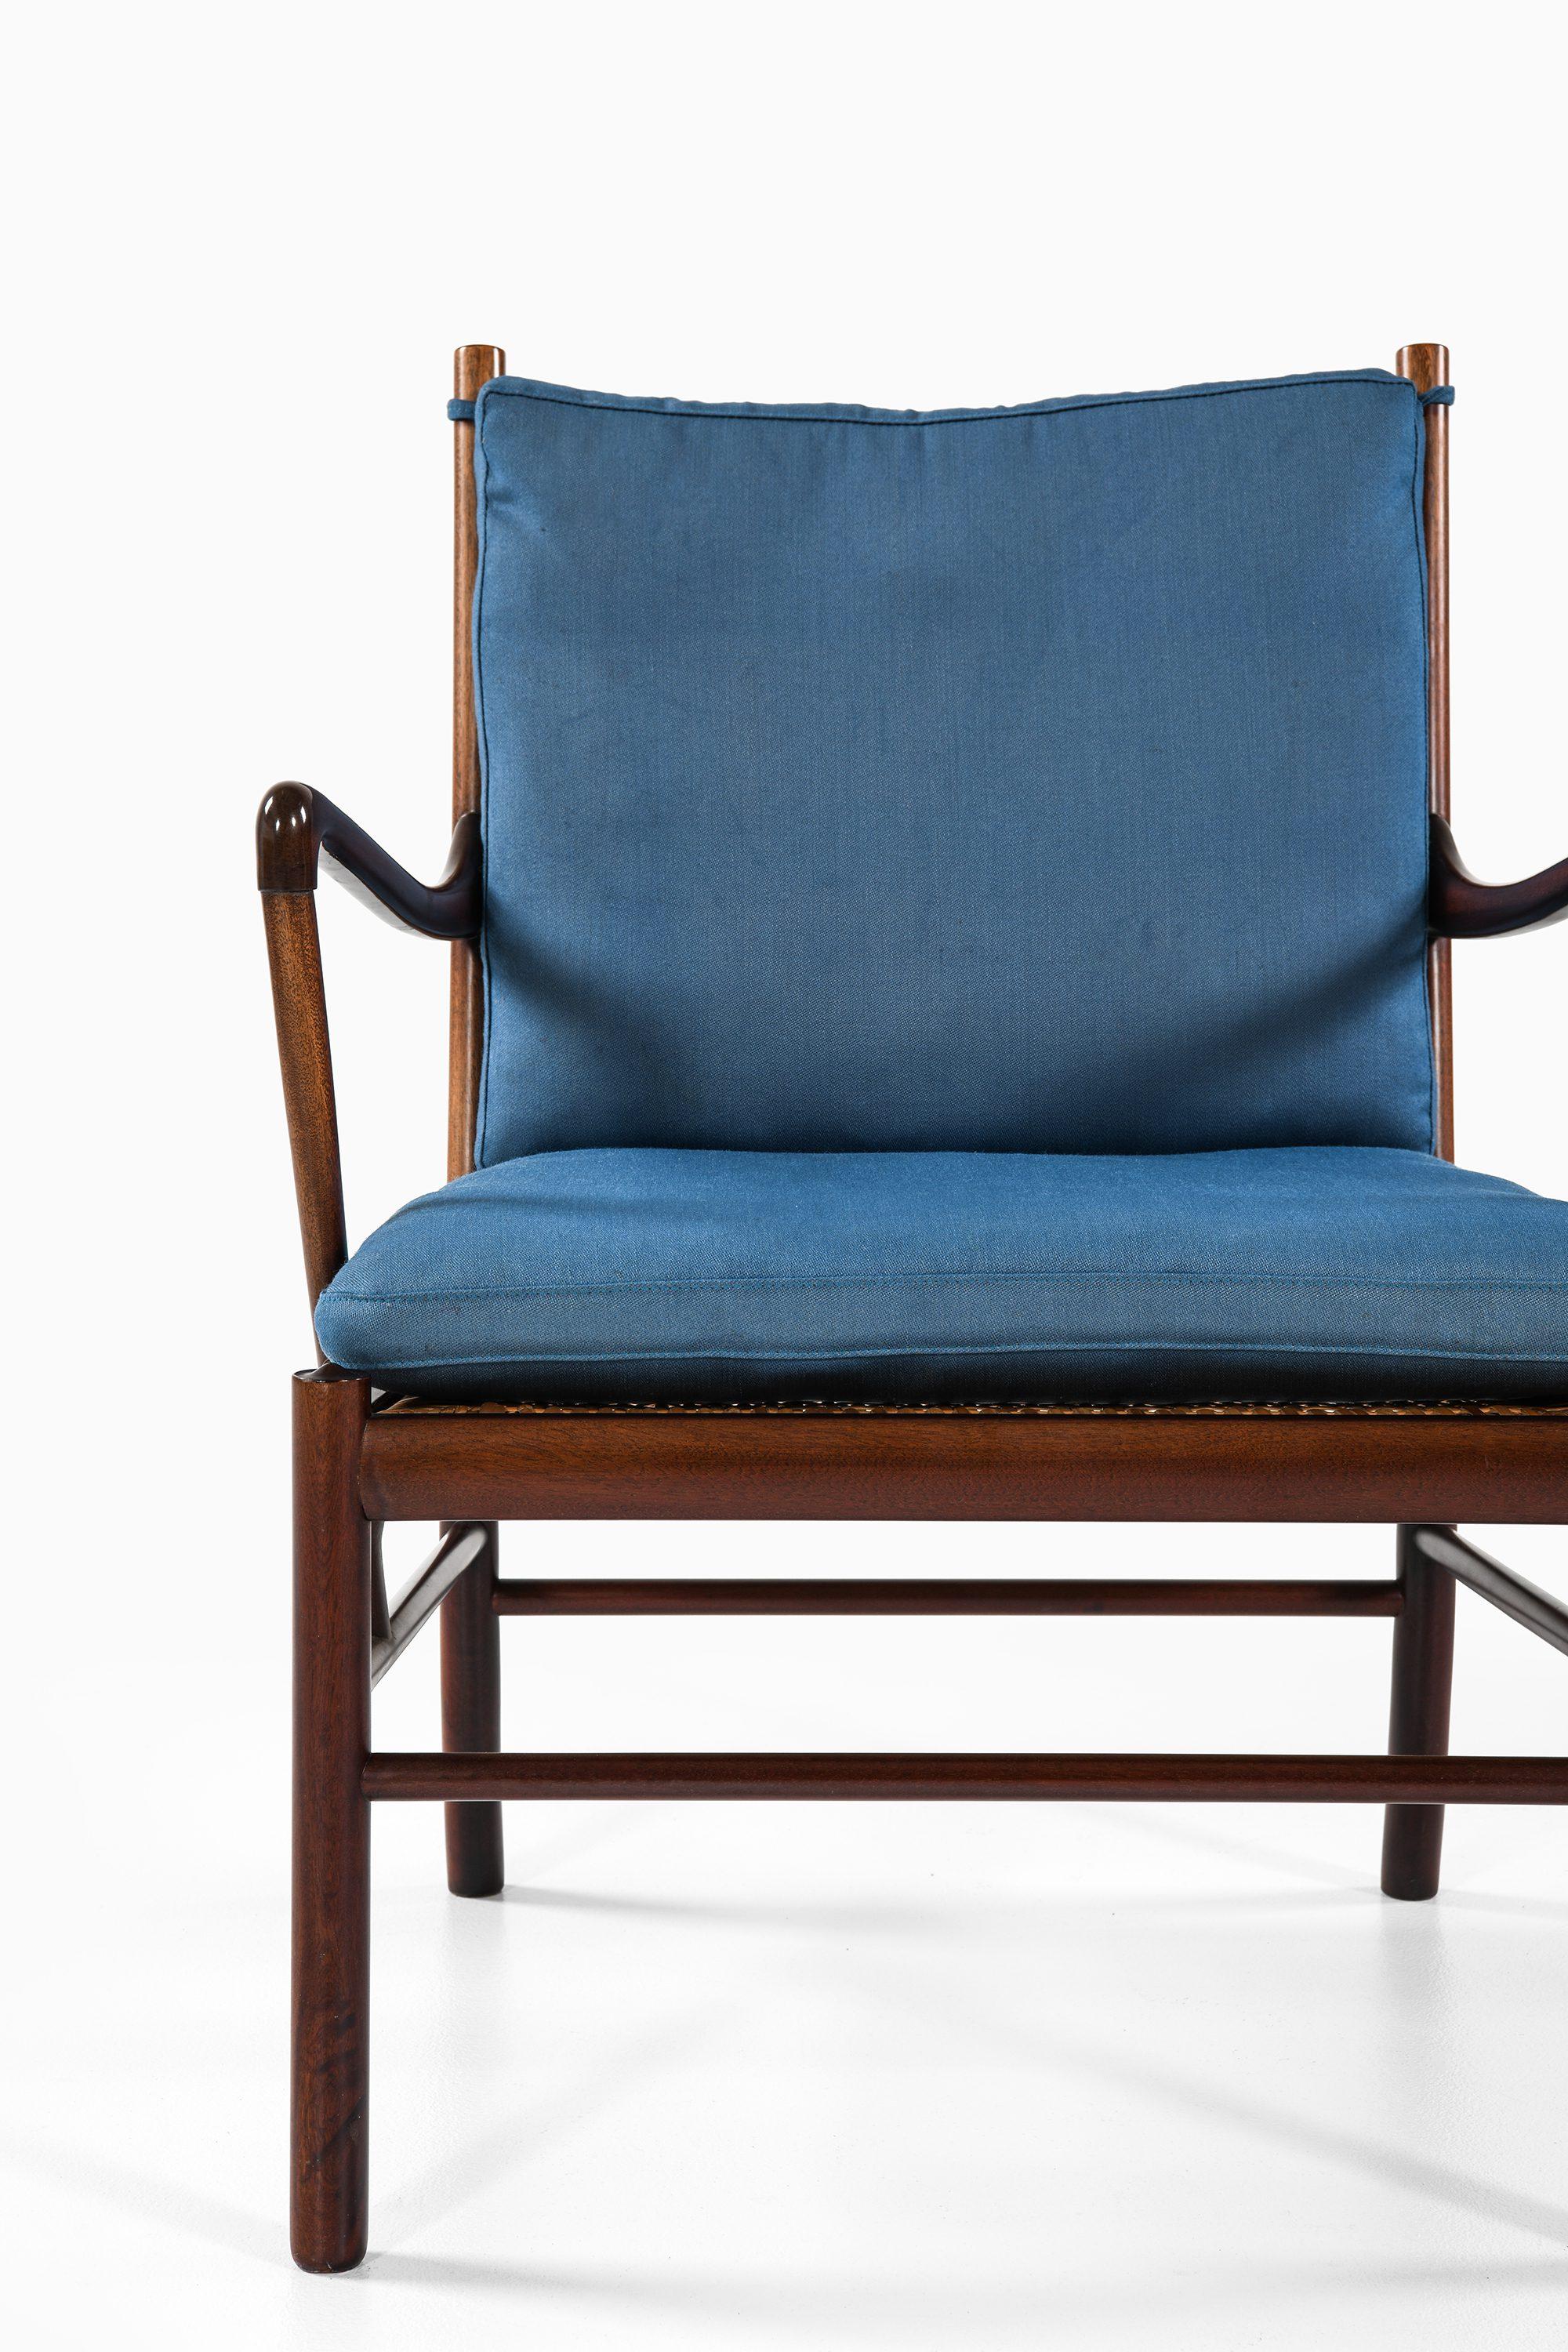 Colonial Easy Chairs in Mahogany, Woven Cane and Fabric by Ole Wanscher, 1960's In Good Condition For Sale In Limhamn, Skåne län